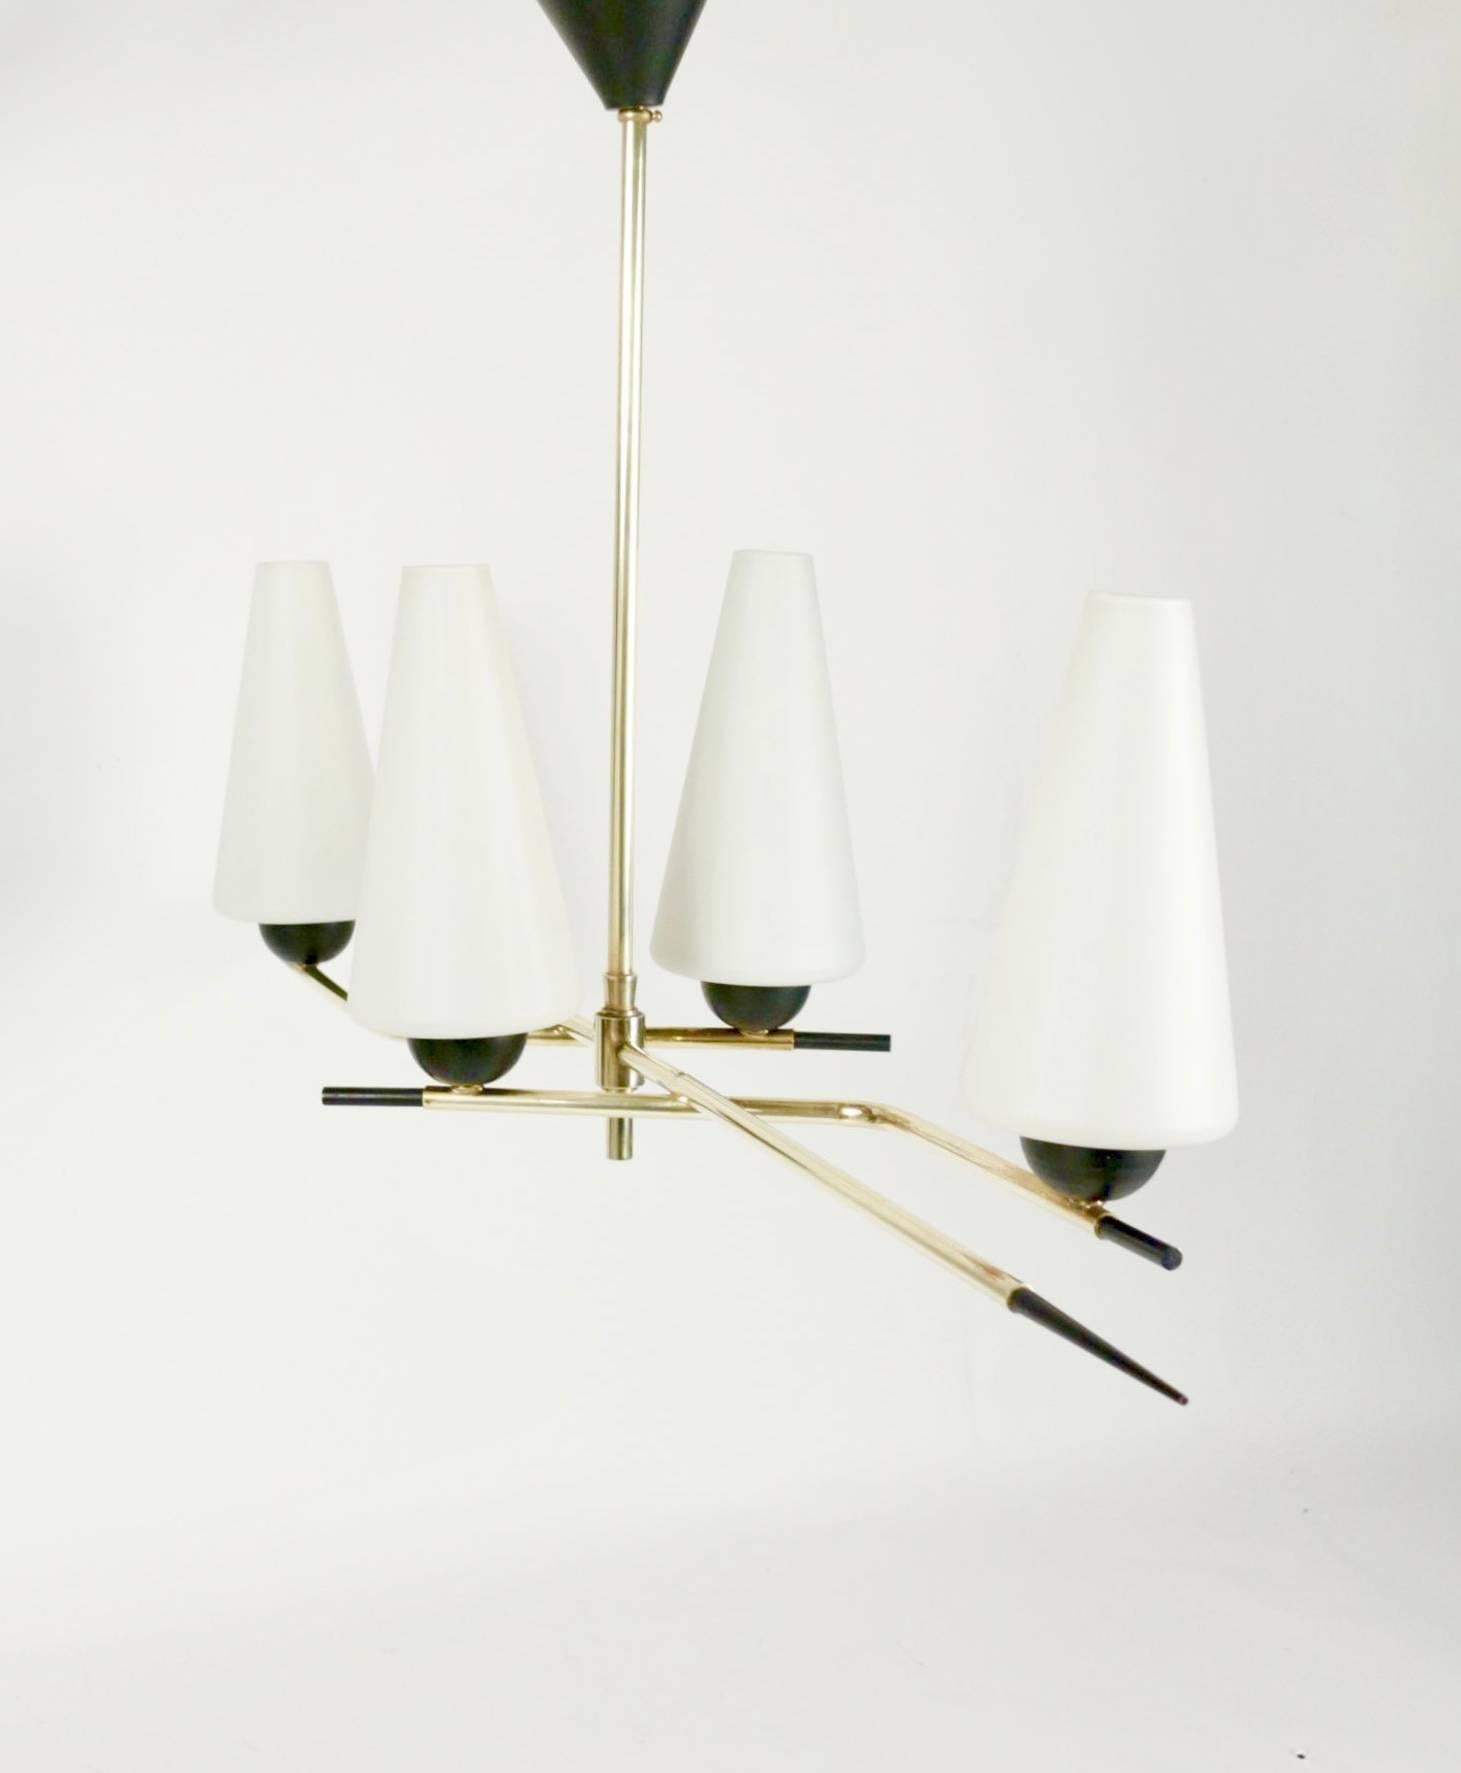 1950s asymmetrical Arlus chandelier.

Composed by four brass stems which support four conical white satine glass lampshades. The brass stems are ended by black lacquered point.

The chandelier is fixed to ceiling by the central stem with black